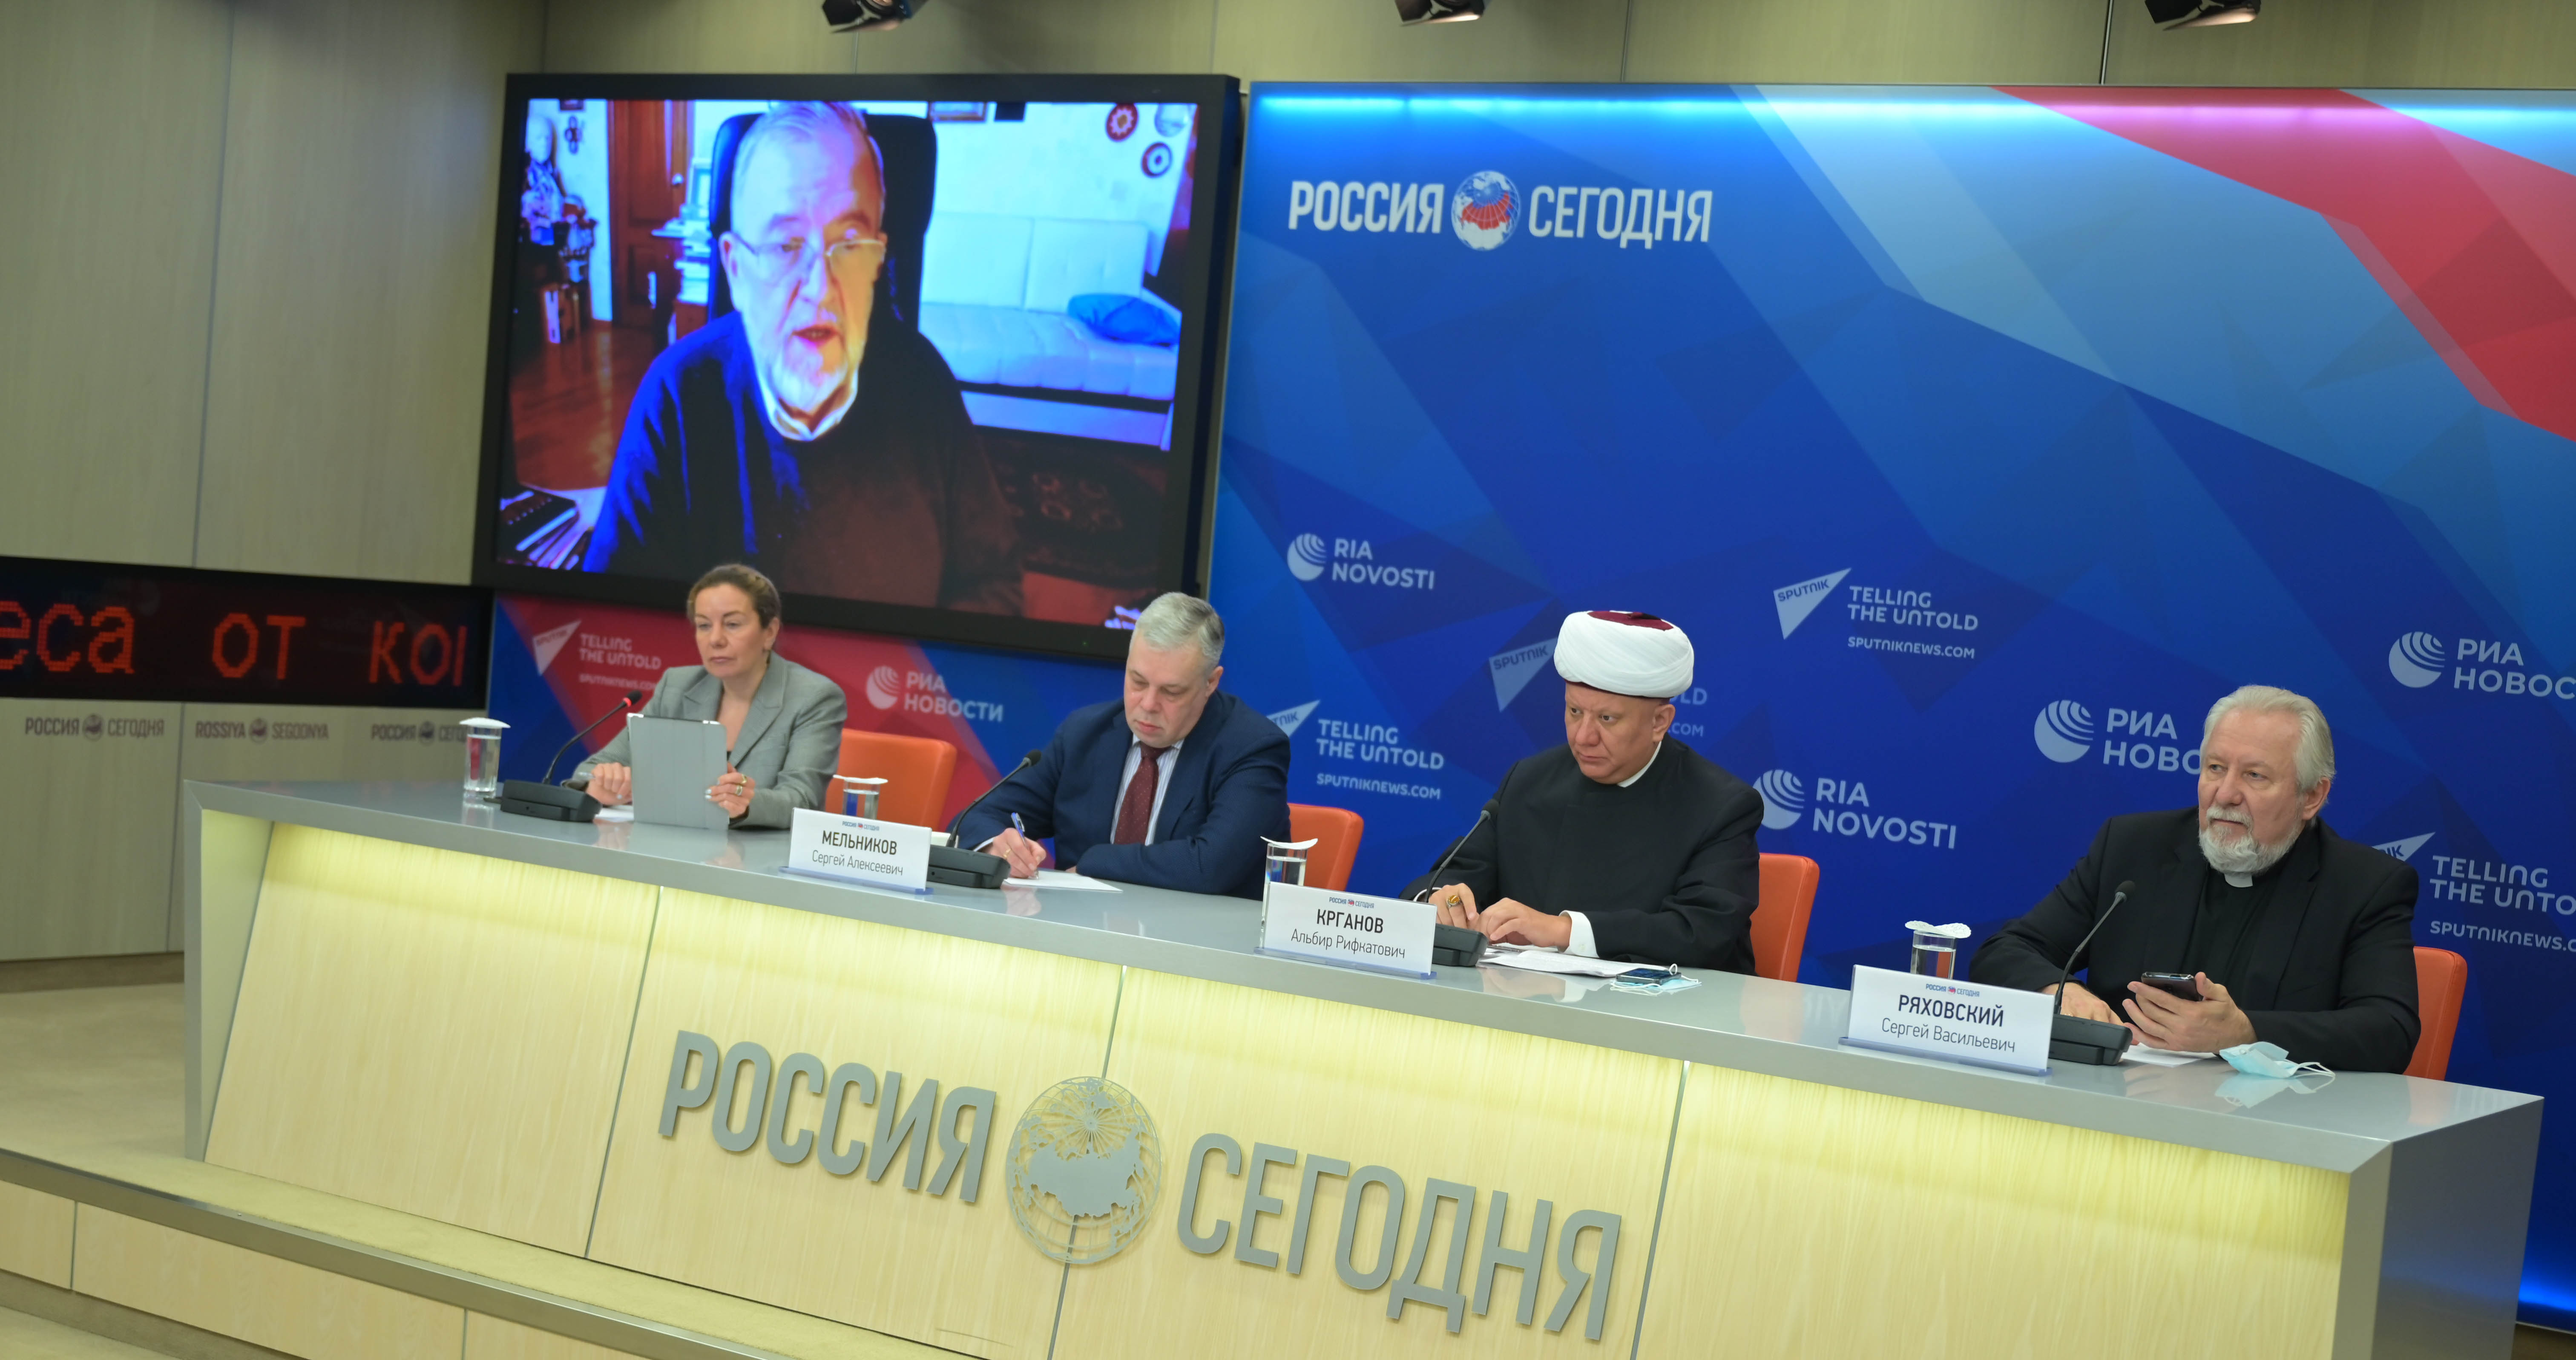 Albir Hazrat Krganov: “The situation with harmonization of interfaith relations is favorable, but the problem of lack of mosques must be solved” 